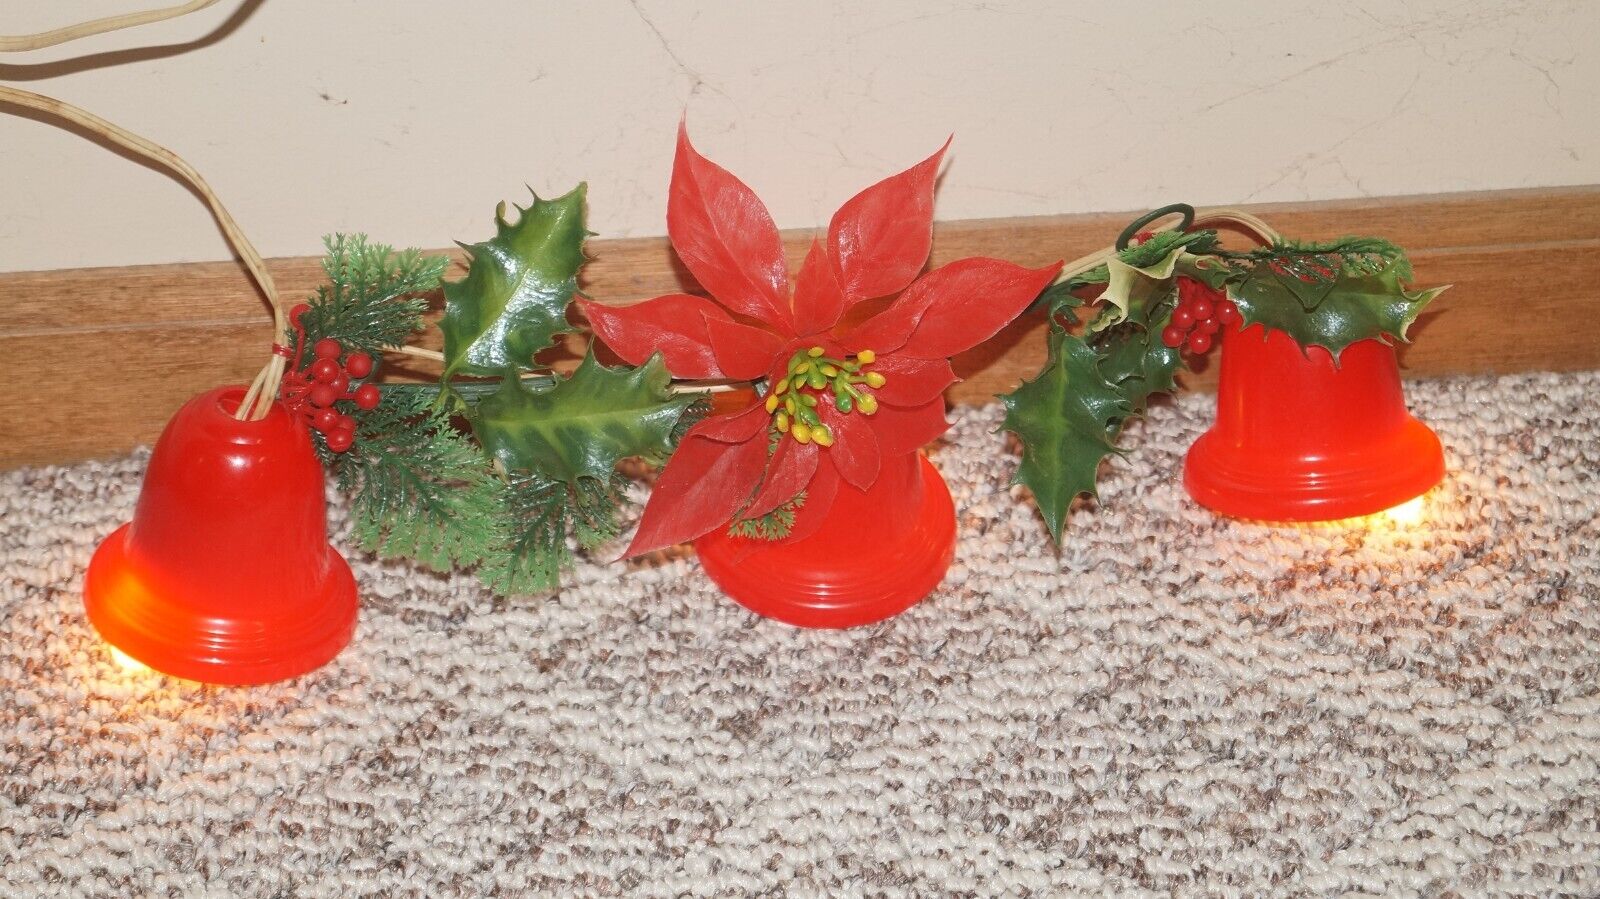 Vintage 3 Lighted Electric Christmas Holiday Bells Decor with Poinsettia